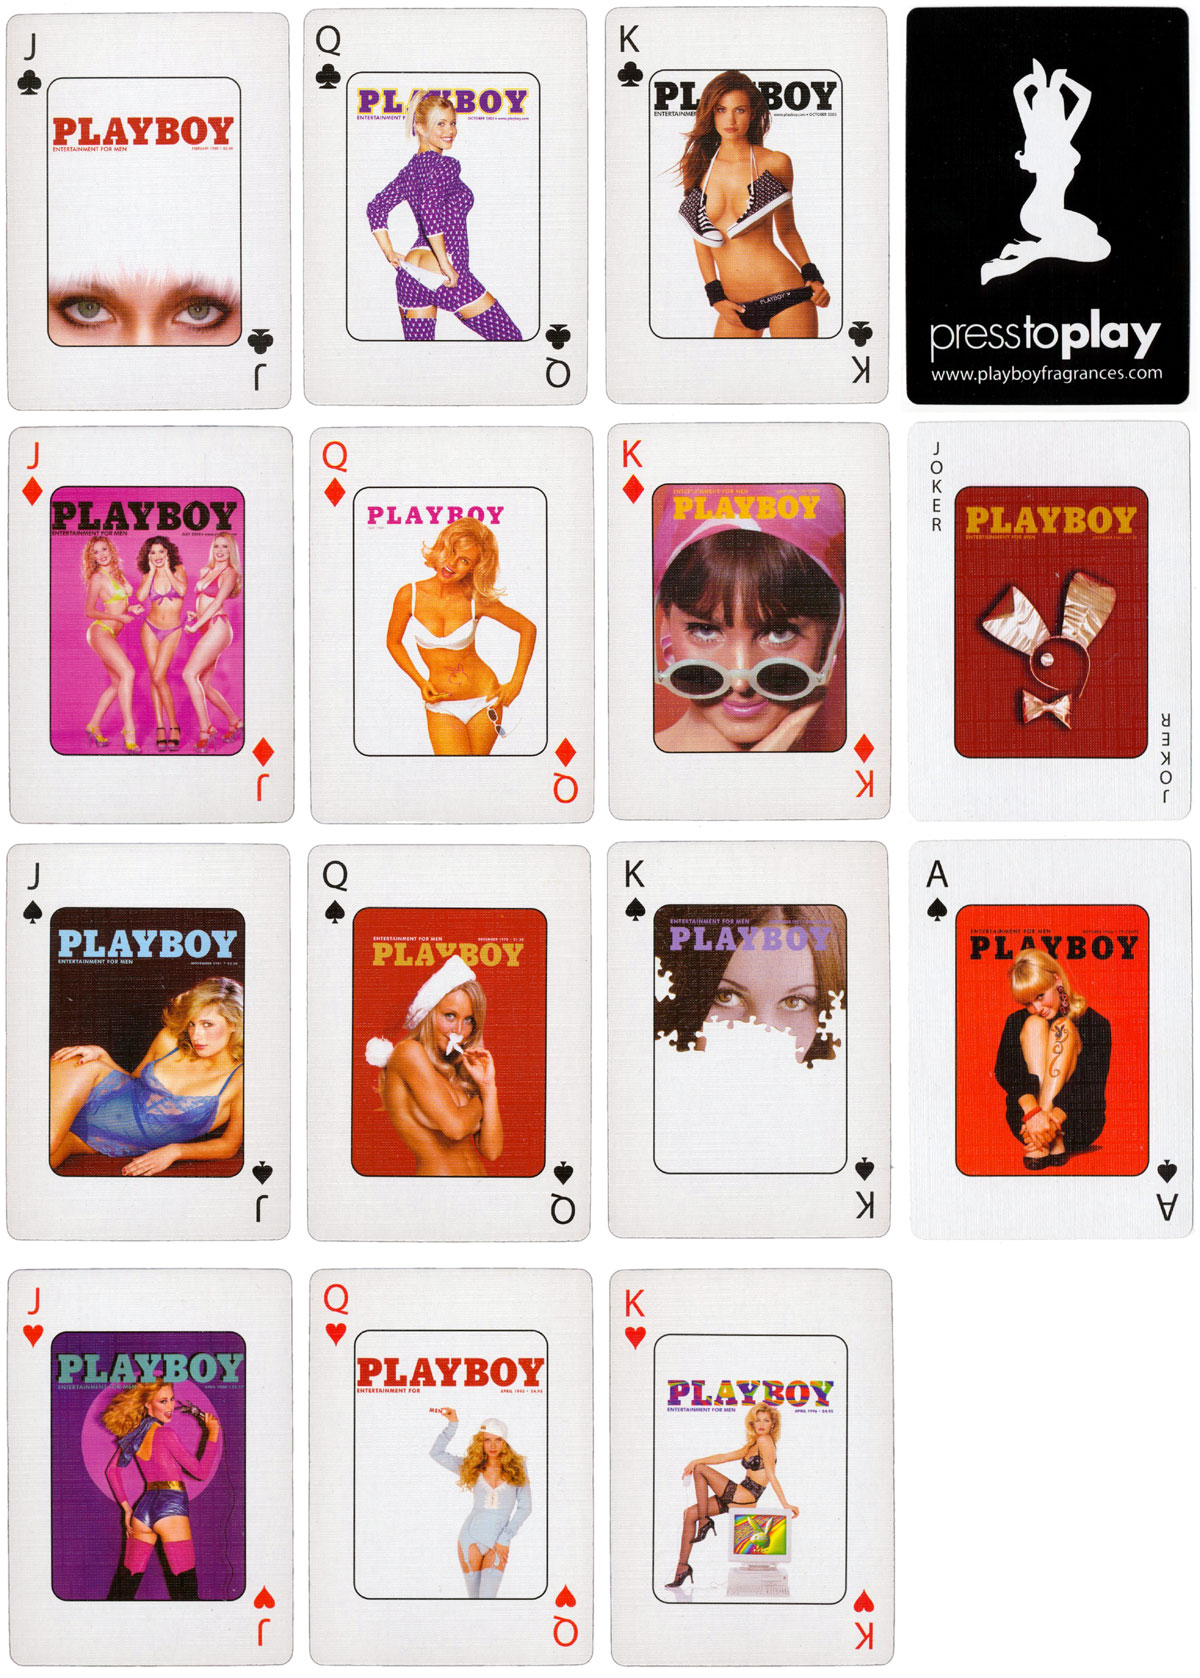 Playboy “Press to Play” playing cards, 2010